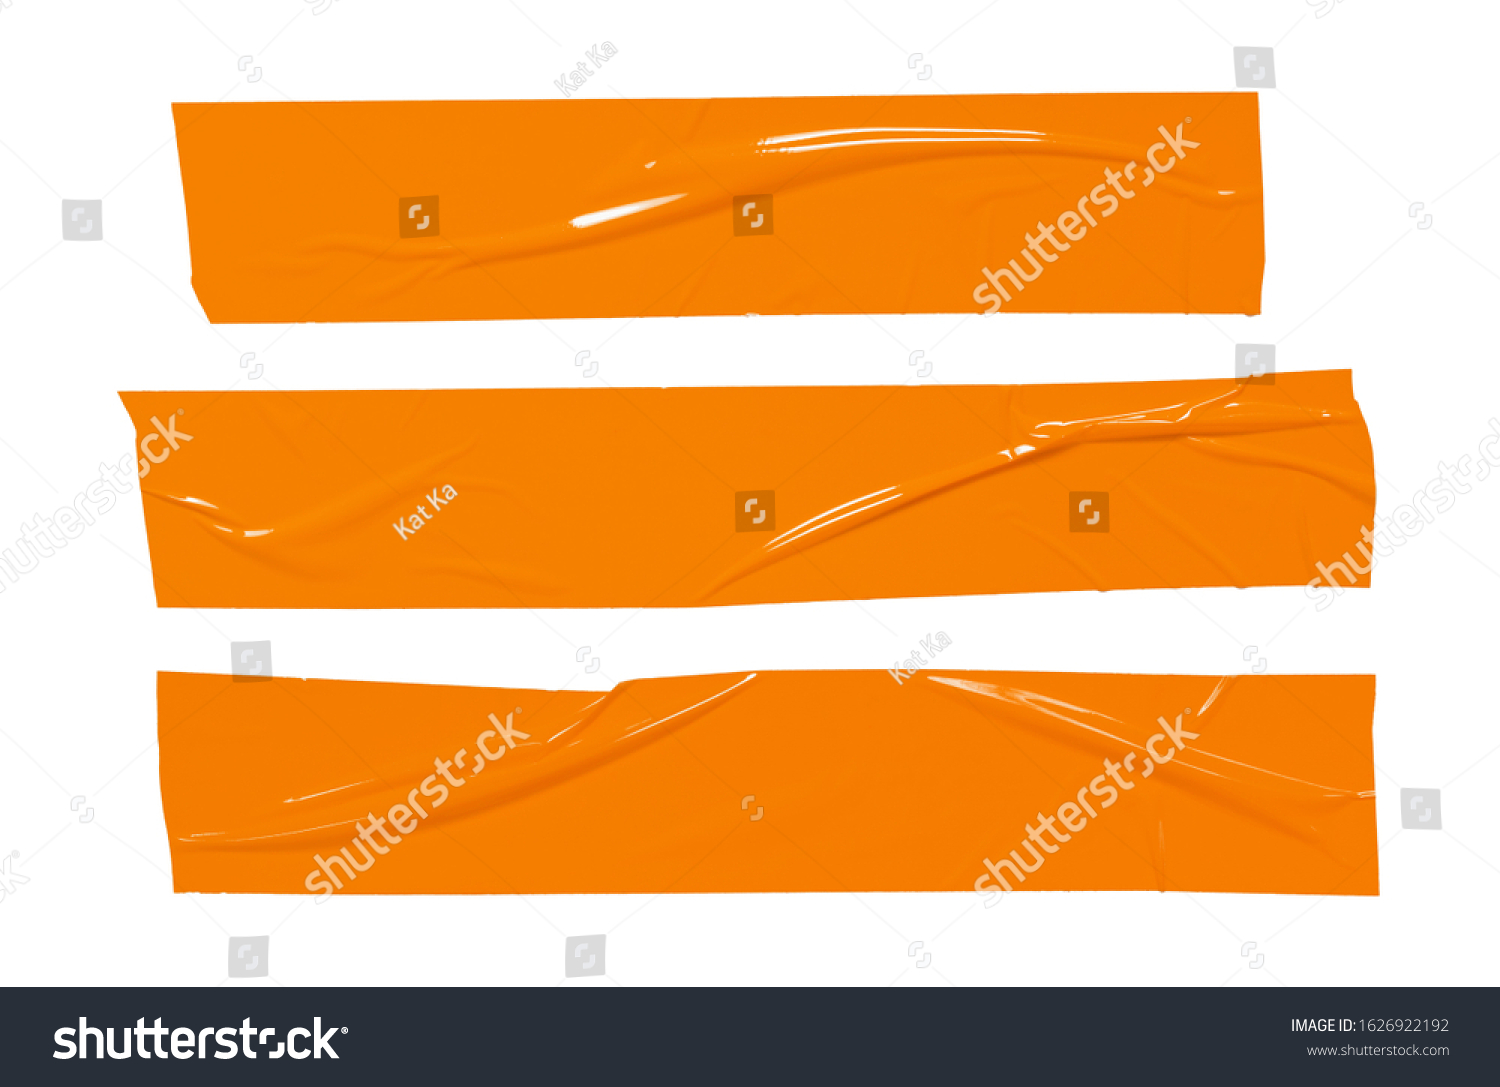 Sticker tape ripped torn pieces. Orange sticky plastic tapes set isolated on white background #1626922192